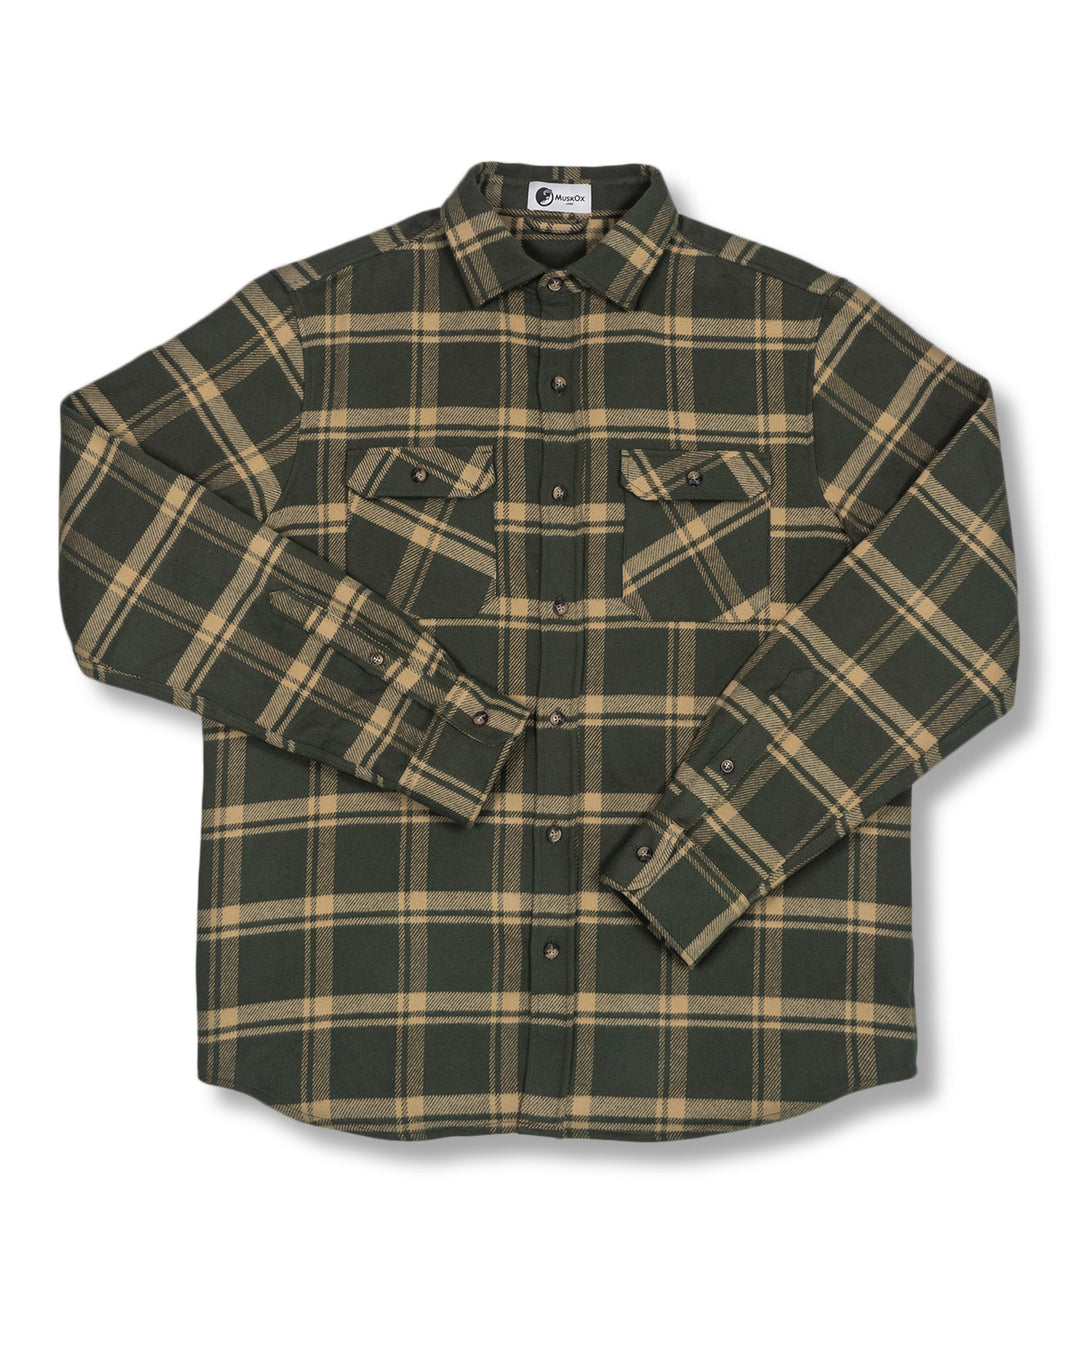 Field Grand Flannel Shirt in Olive